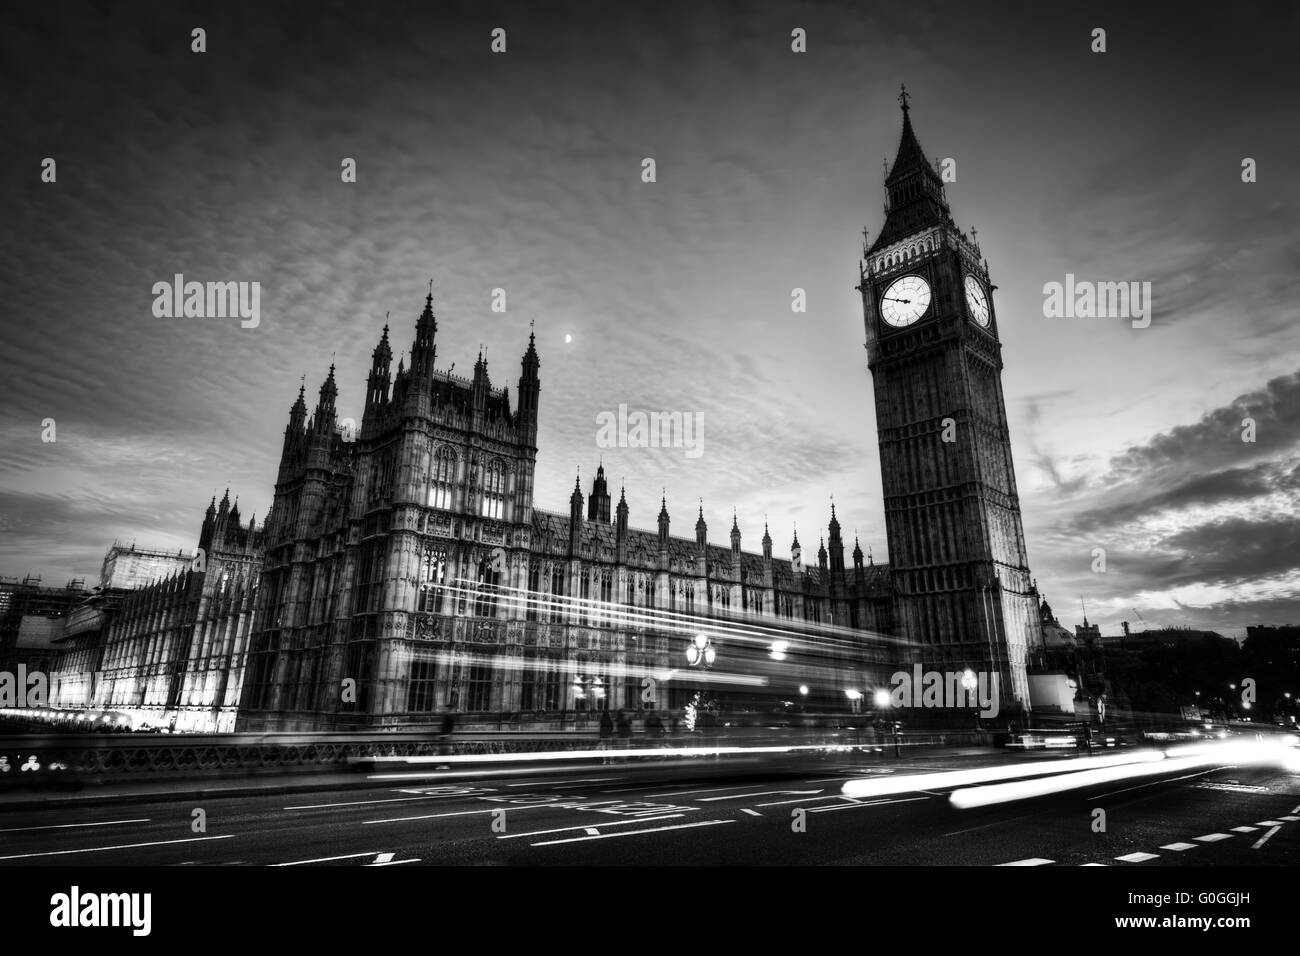 Red bus, Big Ben and Westminster Palace in London, the UK. at night. Black and white Stock Photo